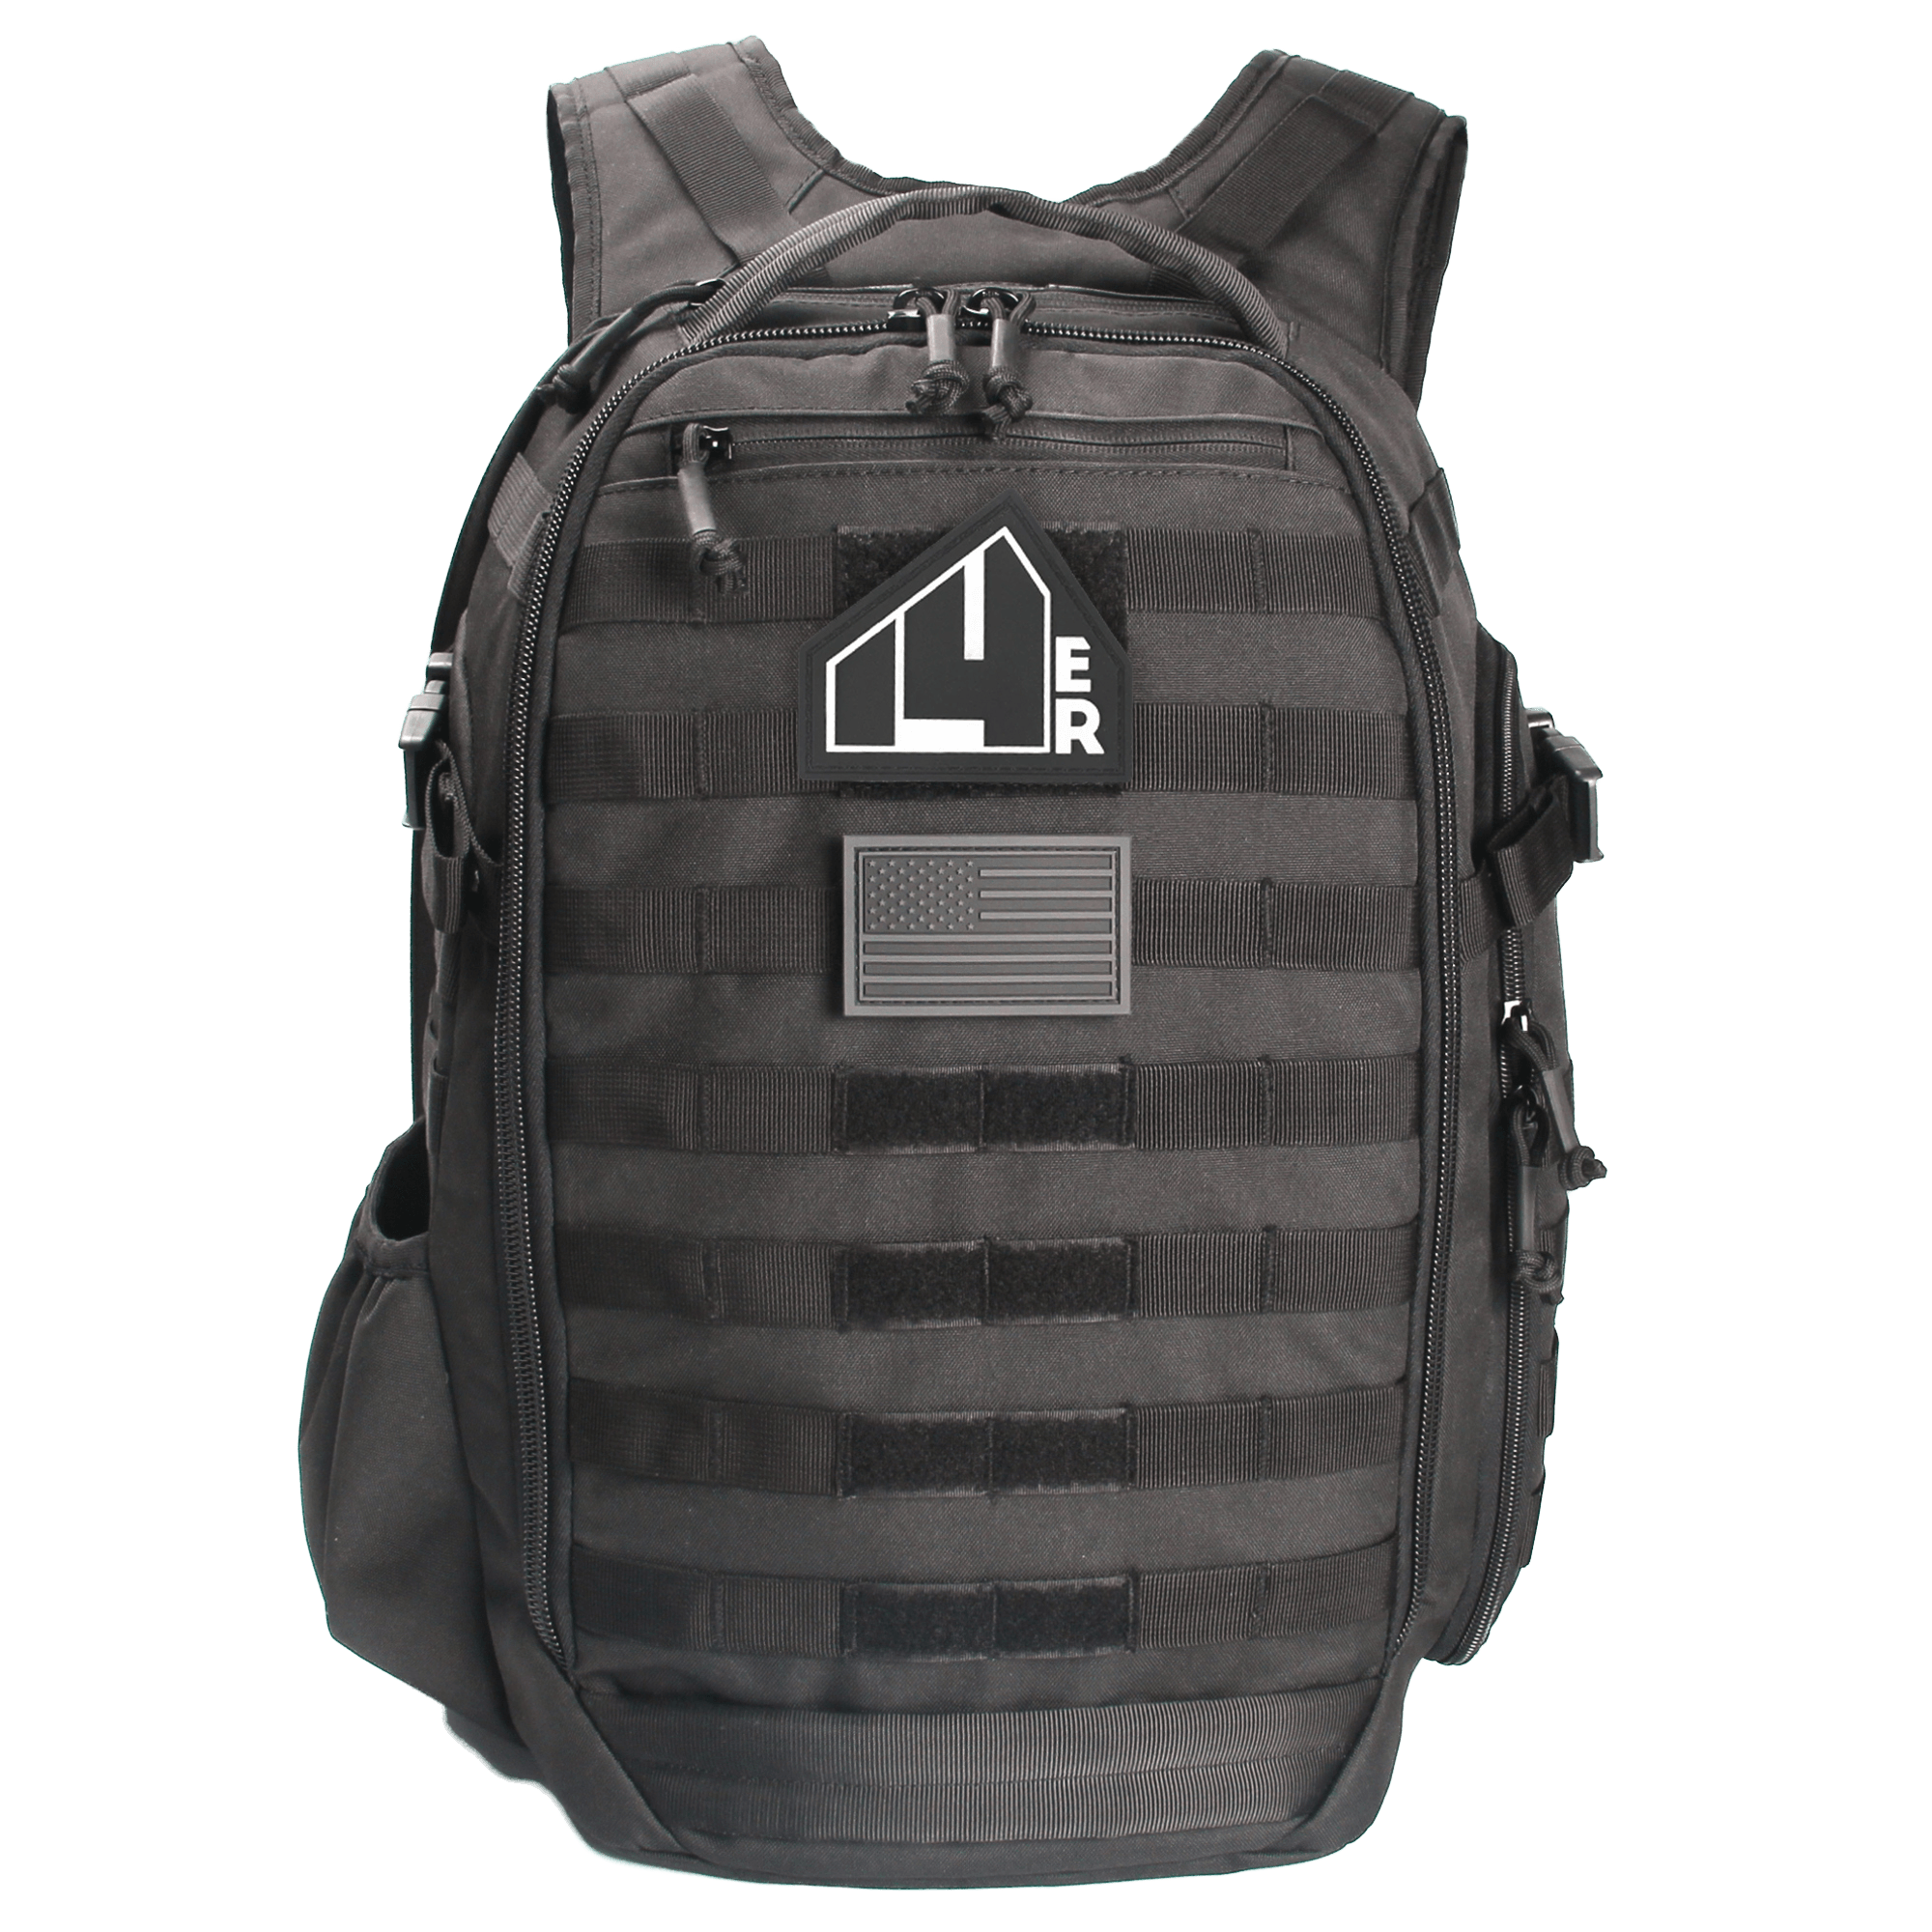 The History of MOLLE: Revolutionizing Tactical Gear and Load-Carrying –  14er Tactical